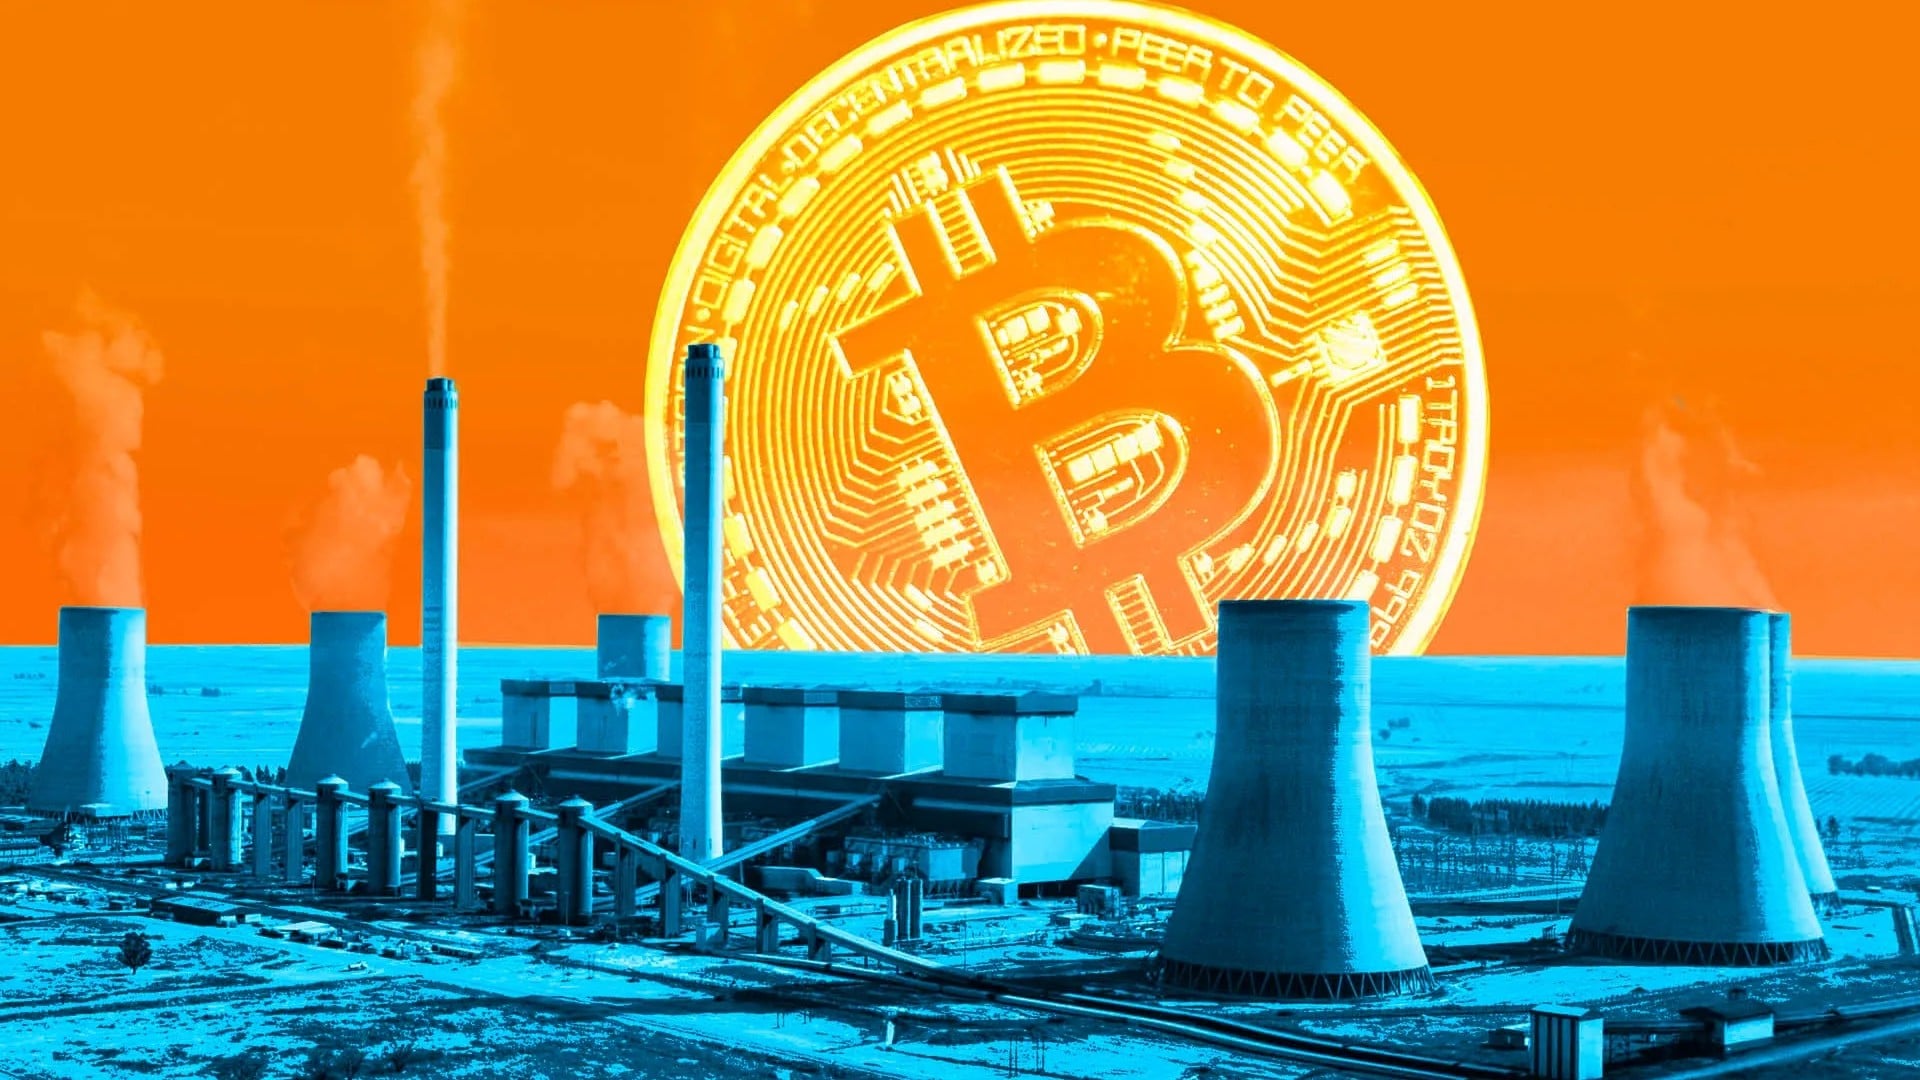 As Altcoins rally, Bitcoin’s Dominance Weakens